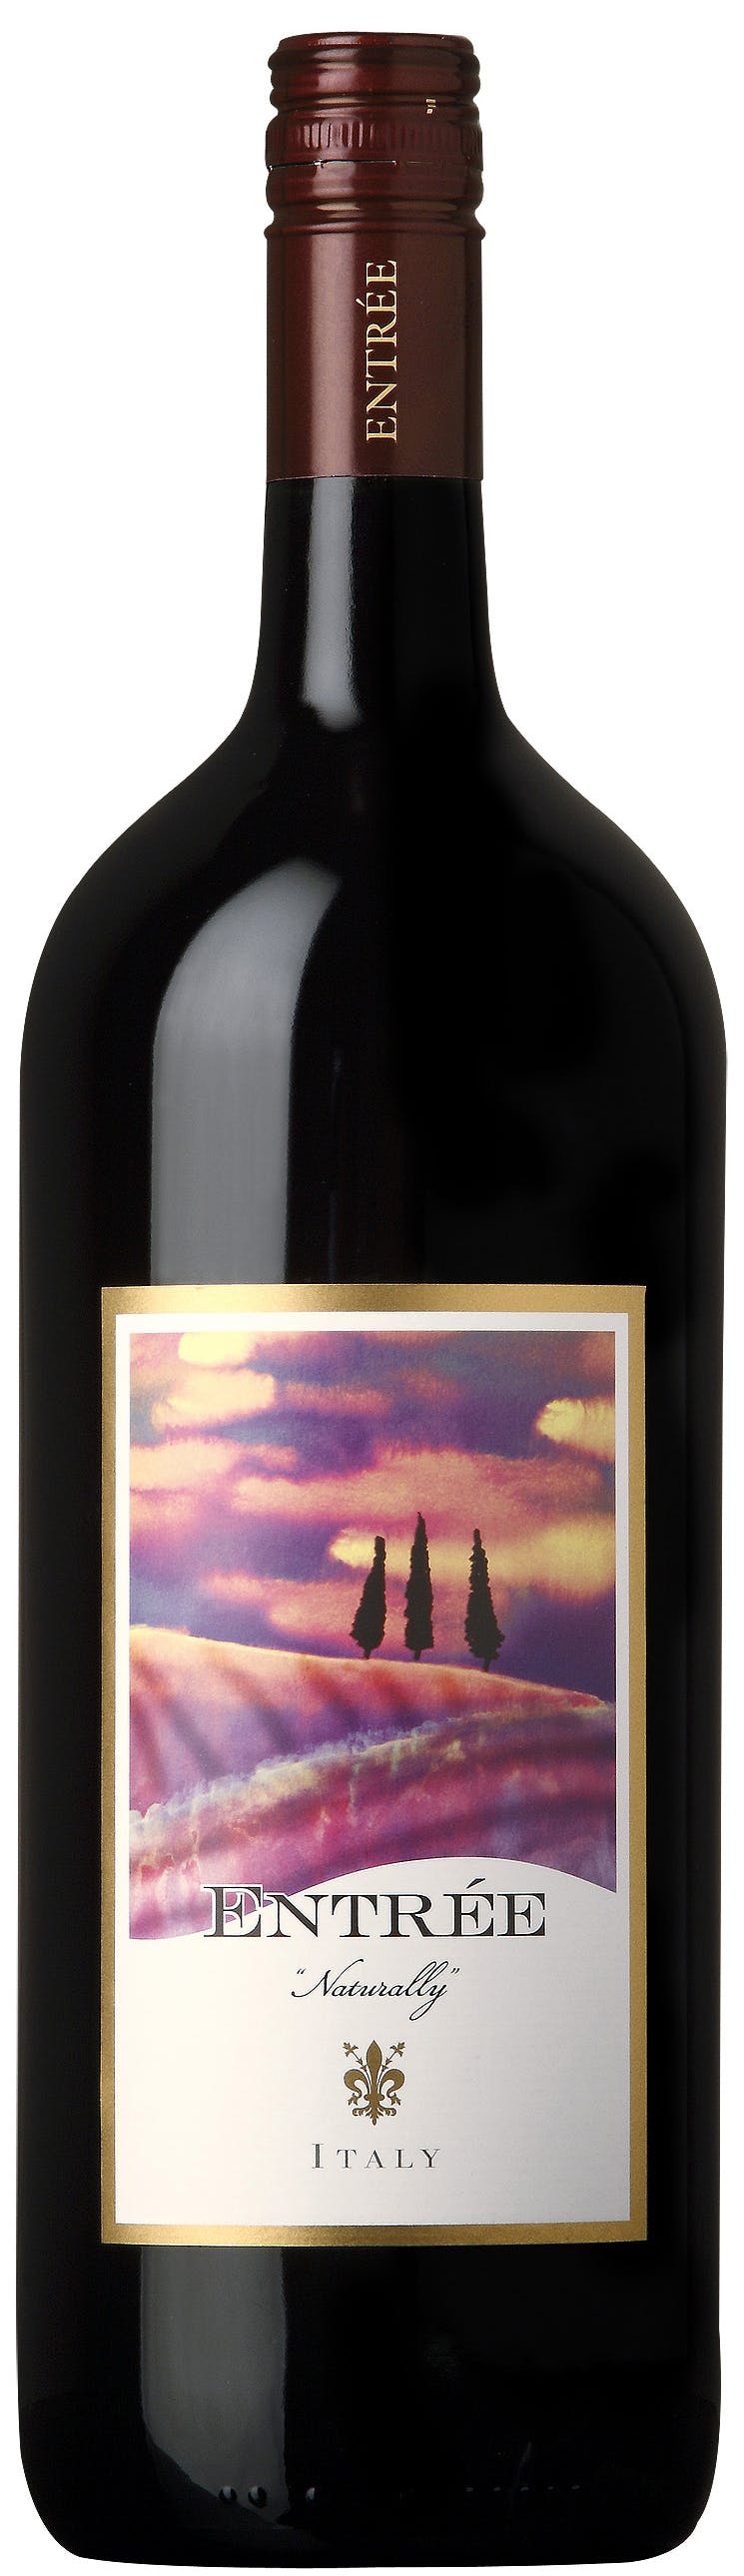 Fruit Wine - Italy - bn_managed - Under $10 - Garden State Discount Liquors